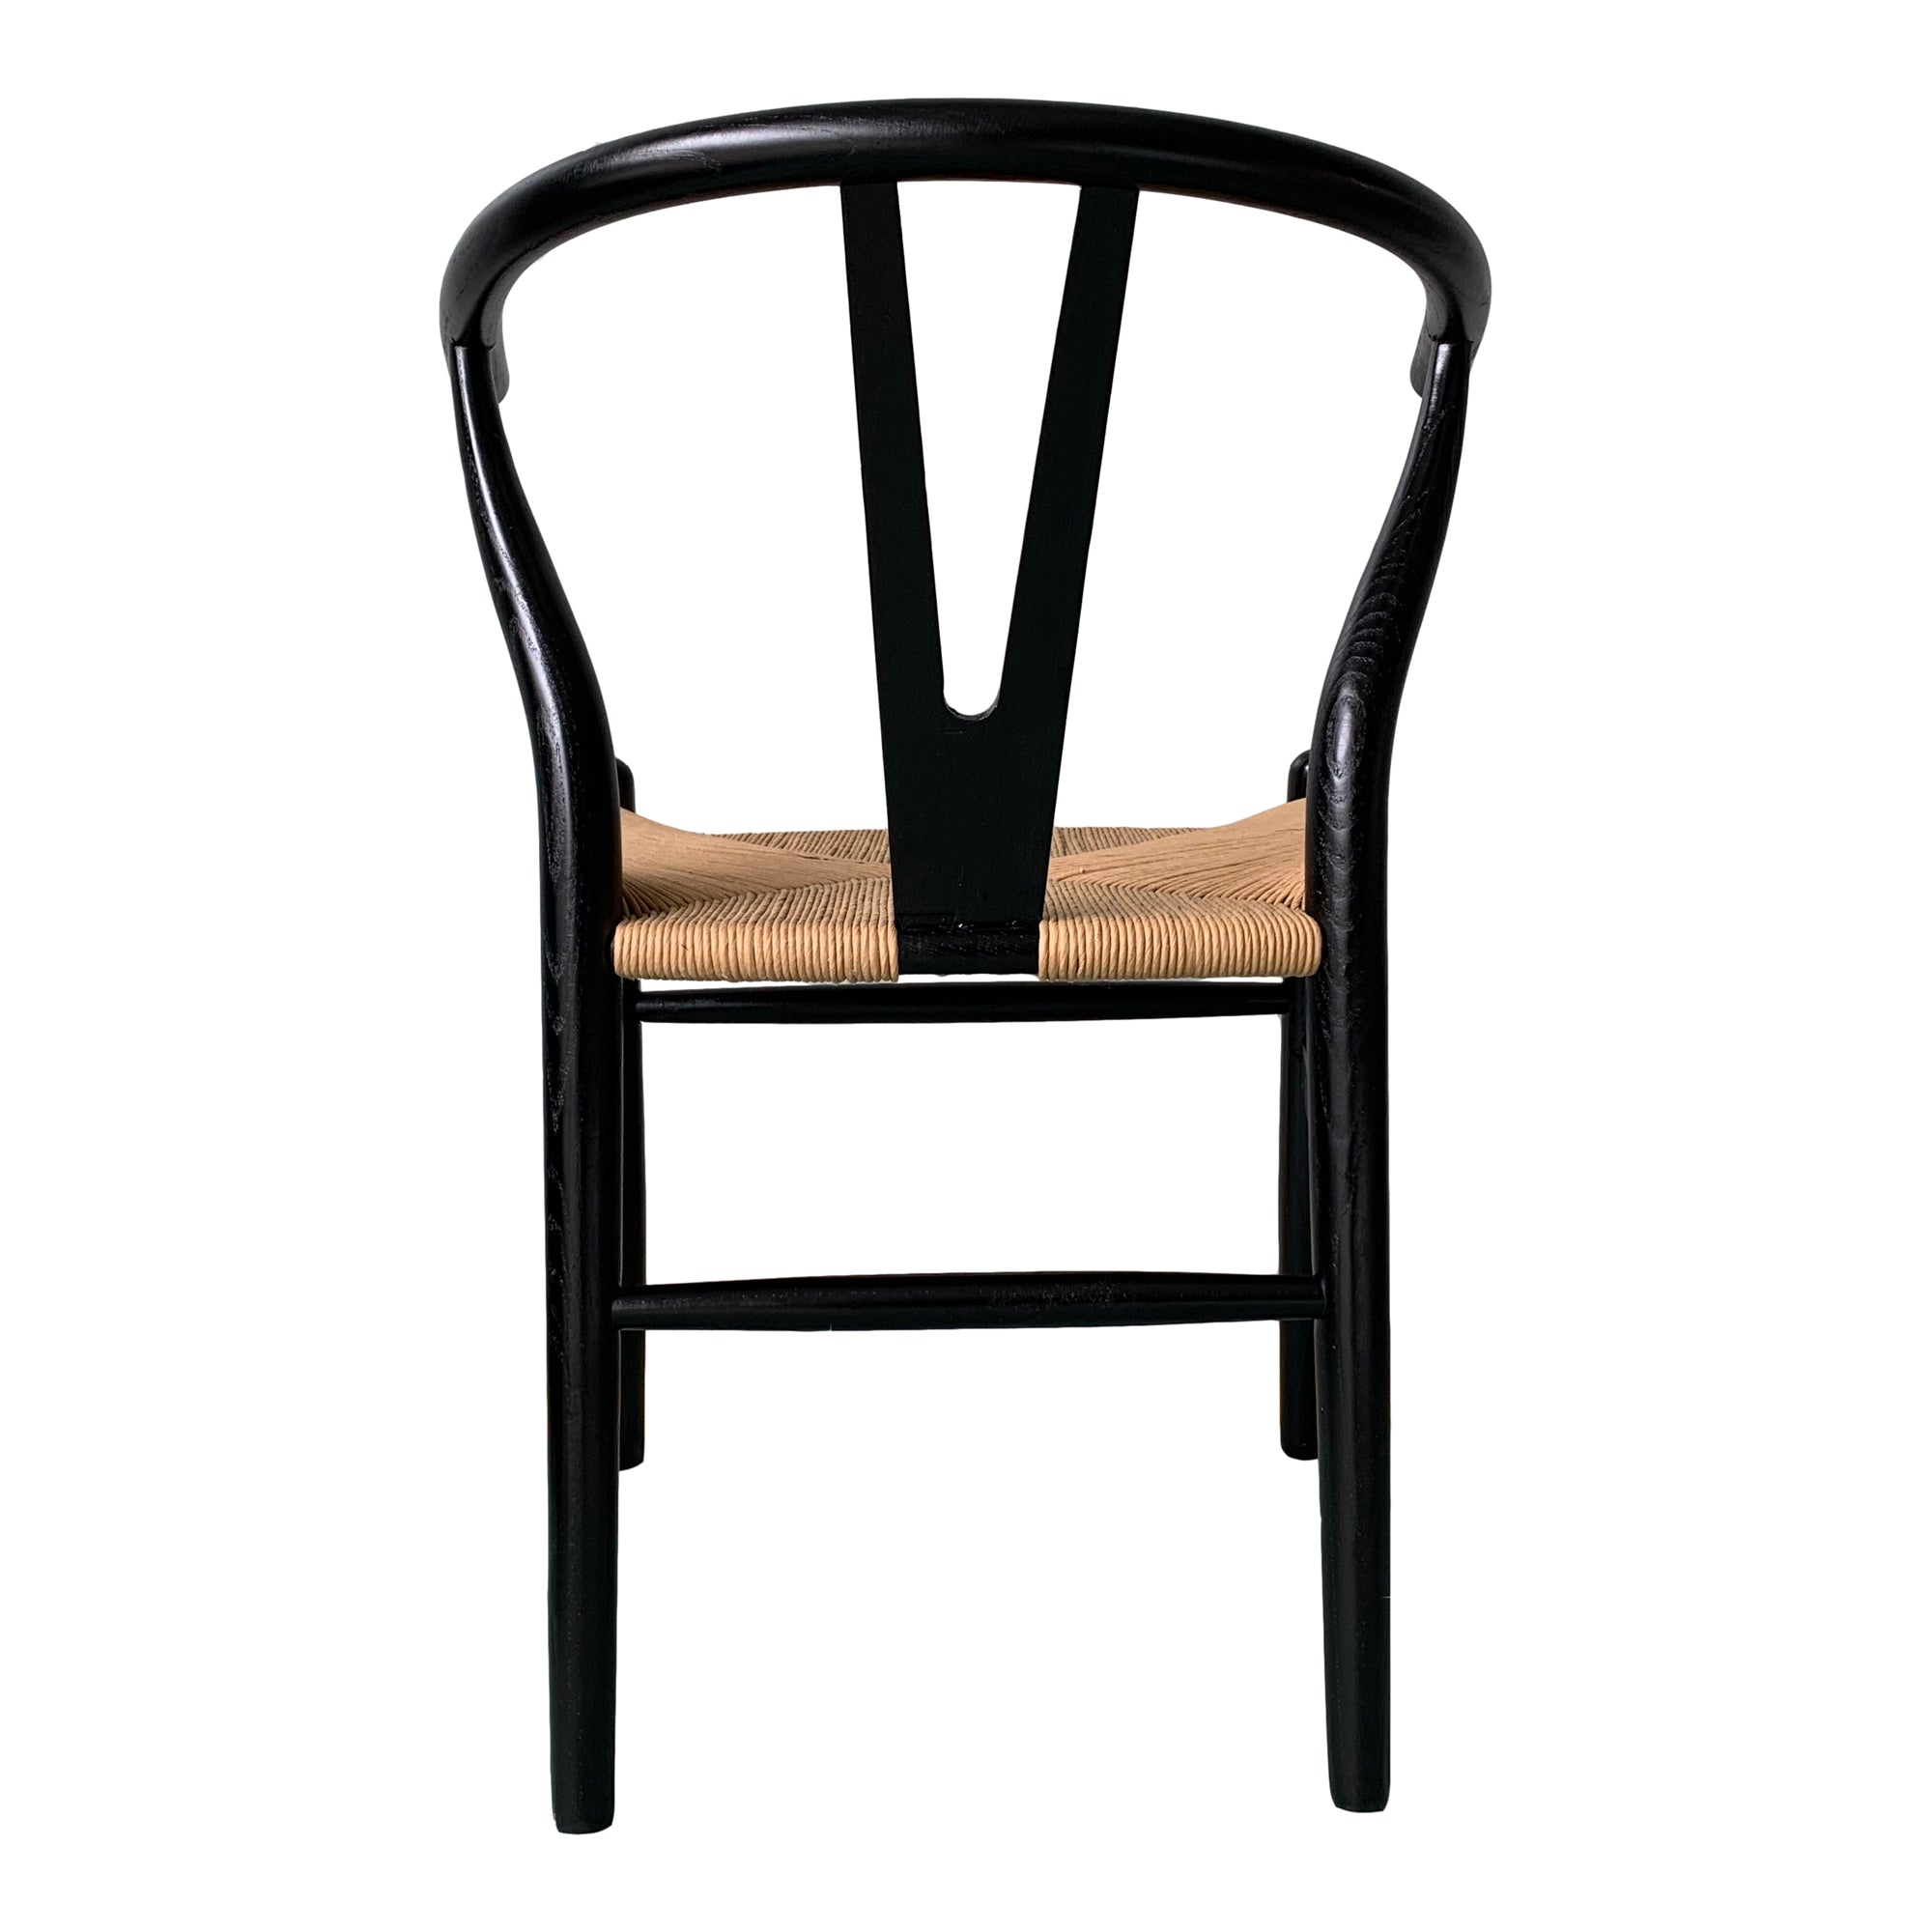 Ventana Dining Chair Black And Natural - Set Of Two